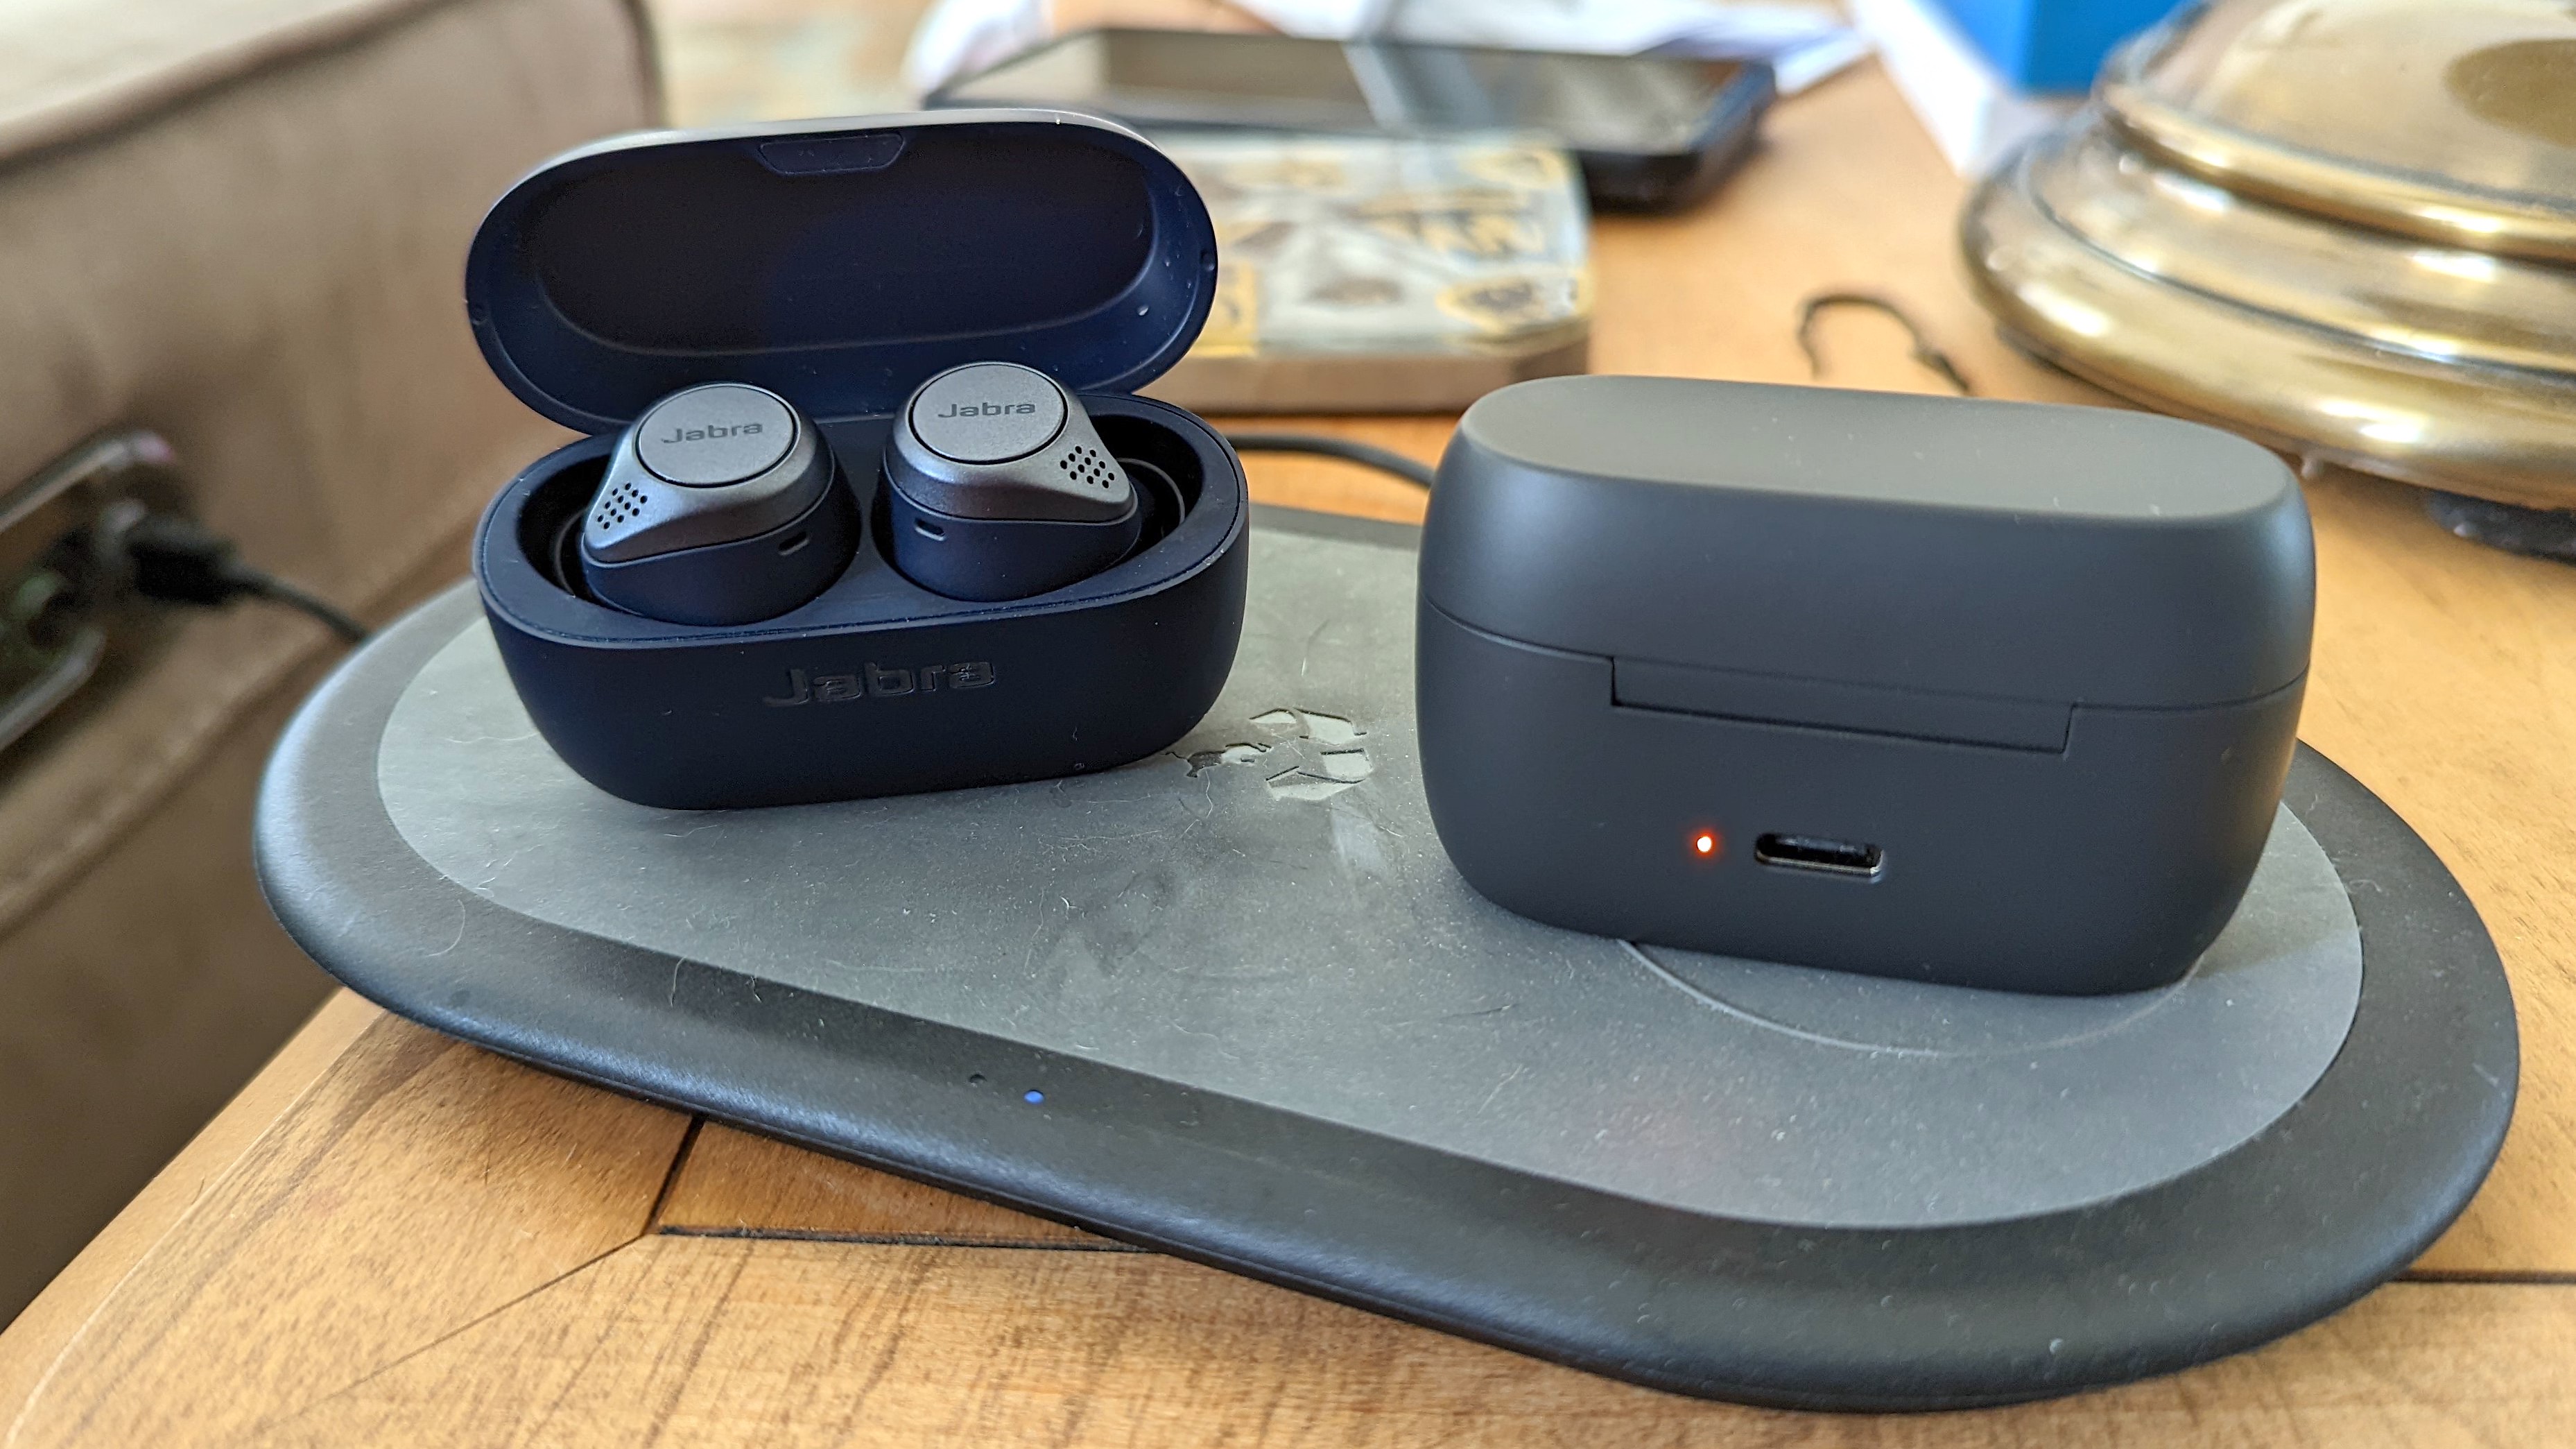 The Jabra Elite Active 75t charging case being charged wirelessly